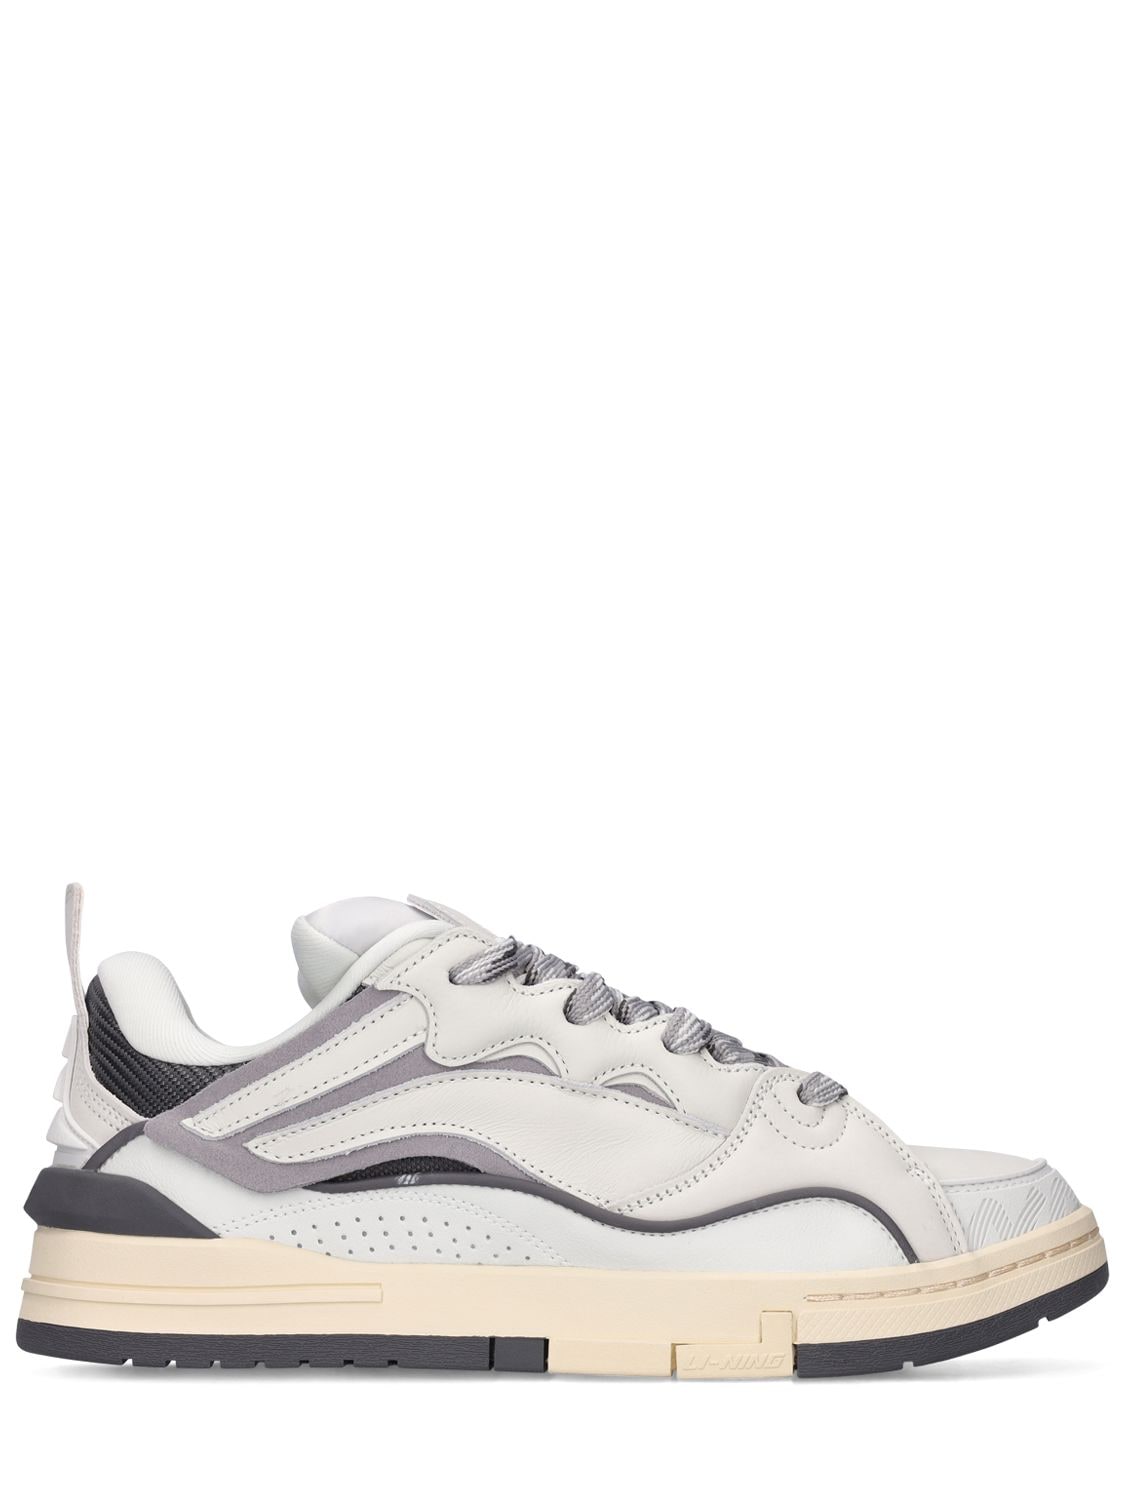 Li-ning Wave Golden Egg Shell Trainers In Grey,multi